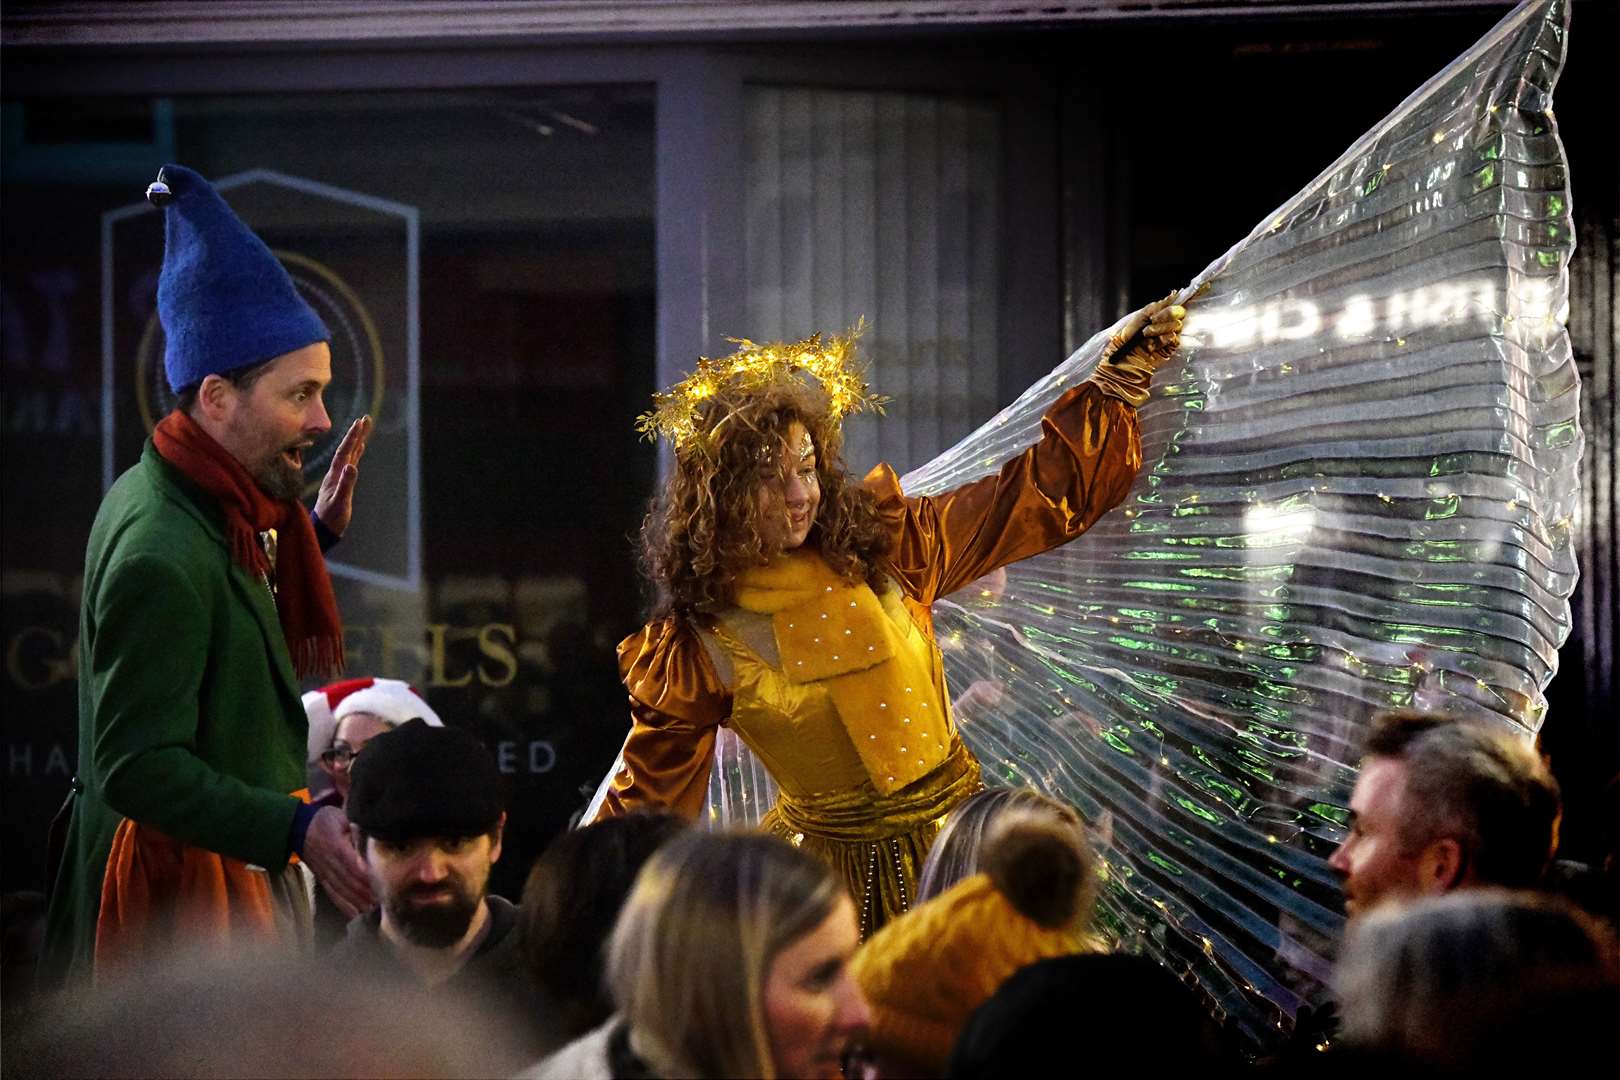 A scene from the Nairn Christmas lights switch-on event last winter.